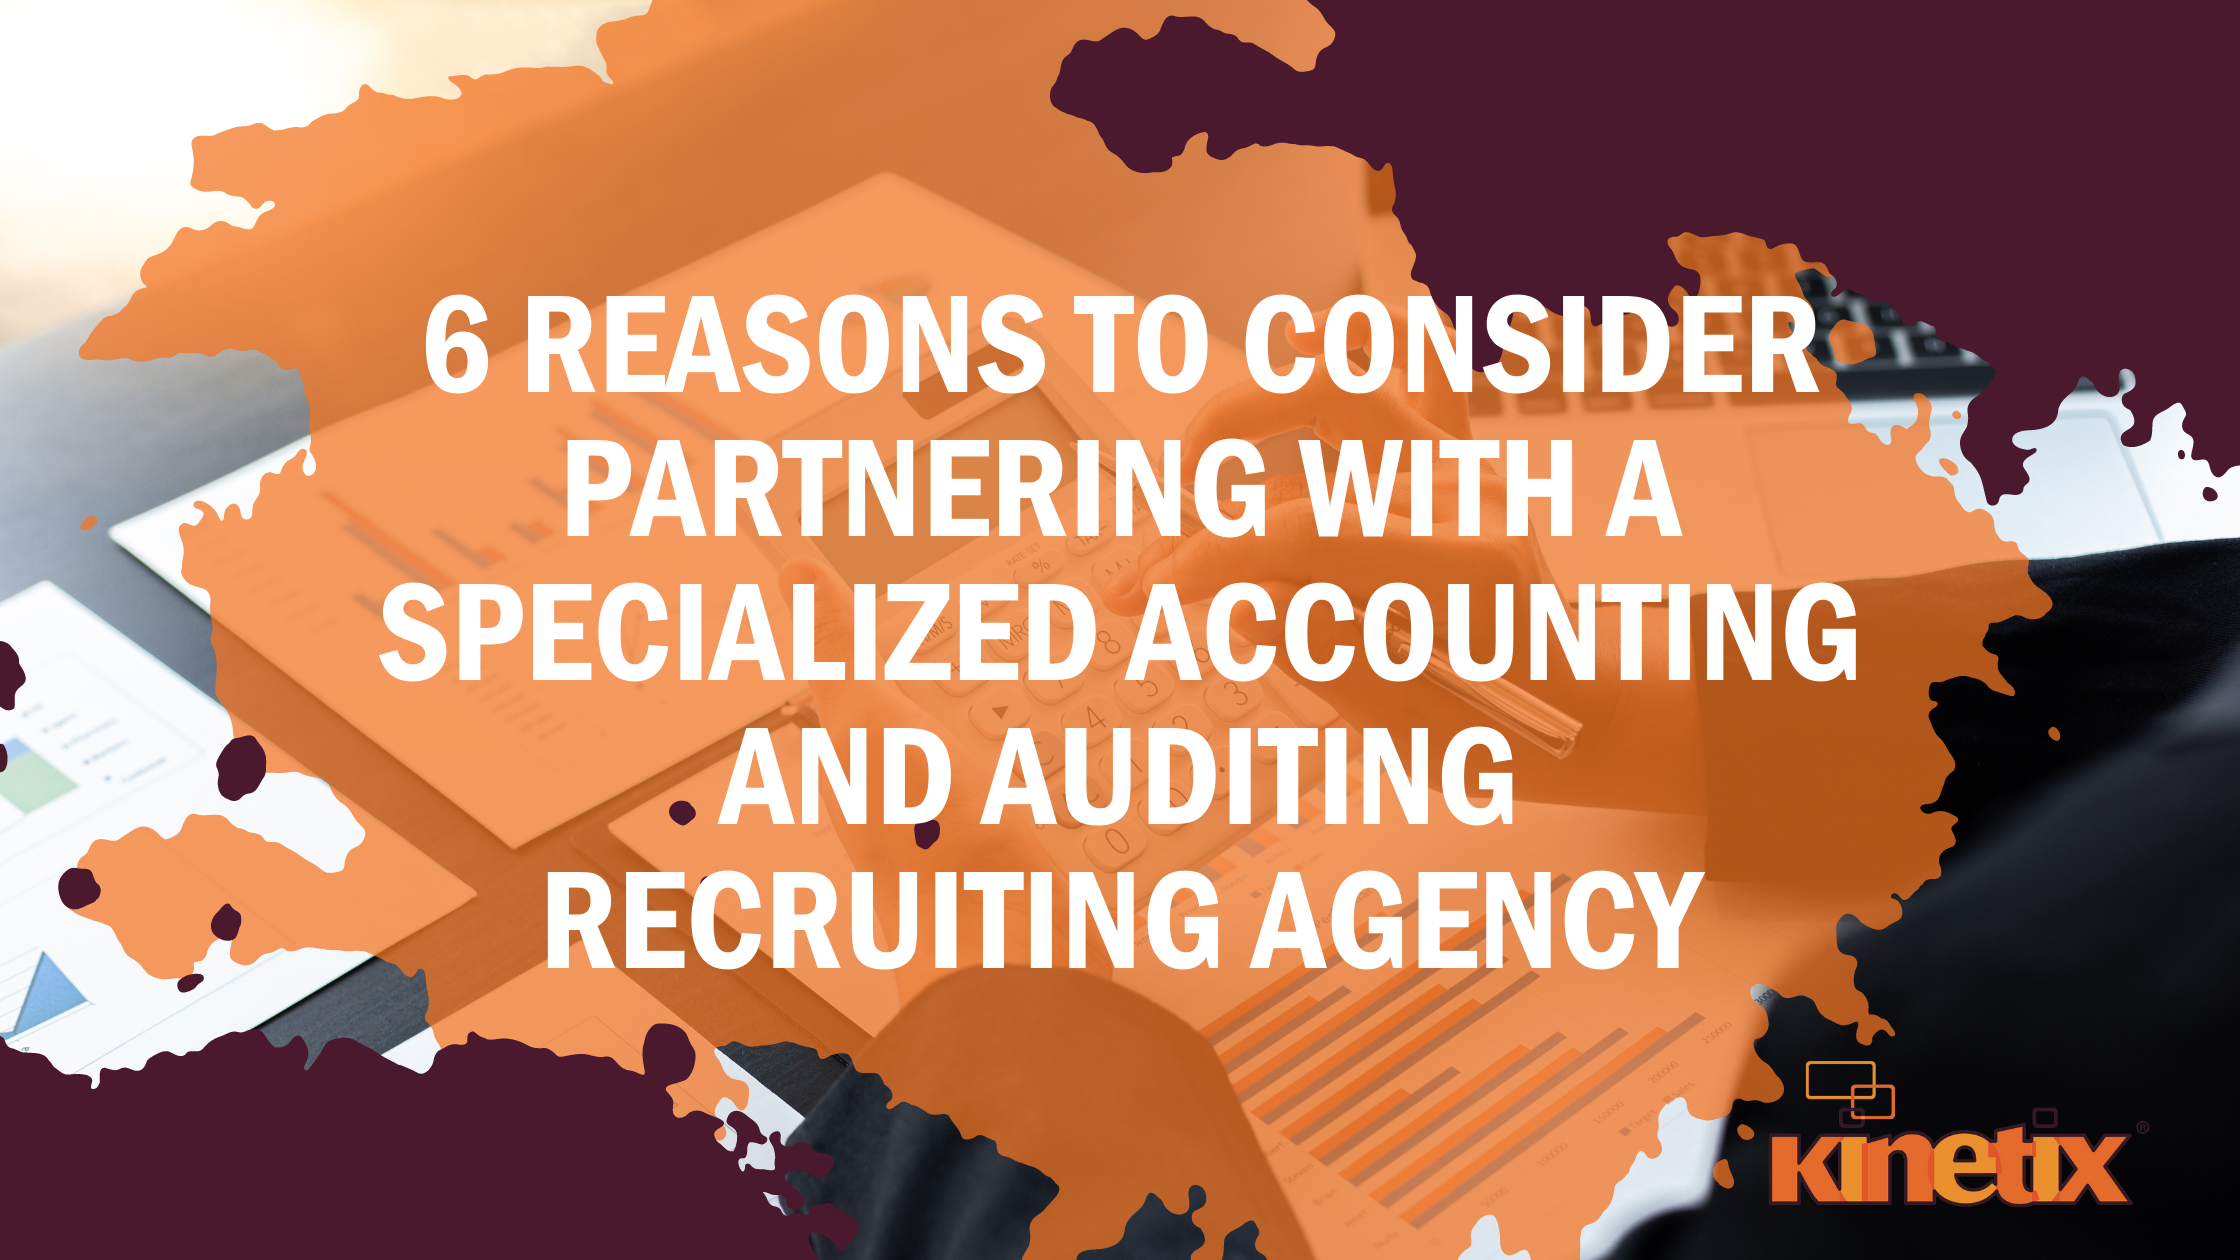 6 Reasons to Partner with a Specialized Accounting Recruiting Agency